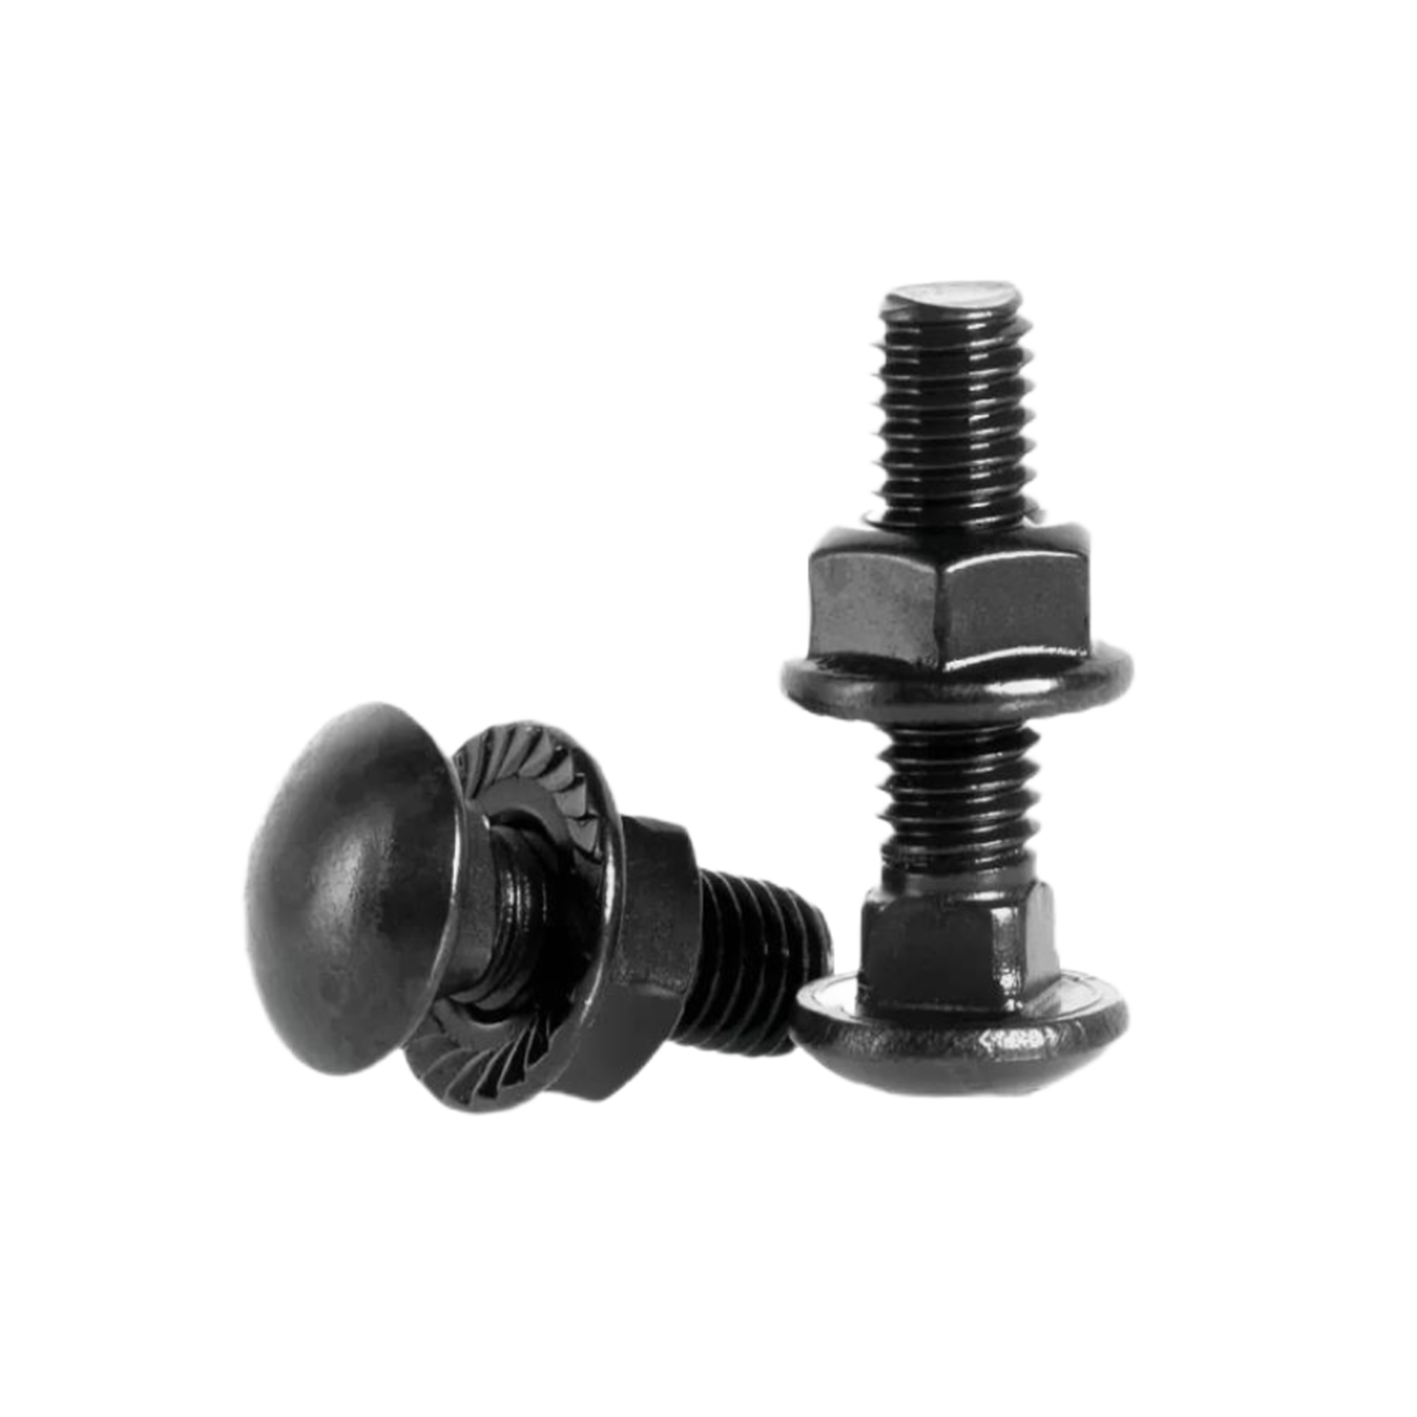 Black M3-M12 Stainless Steel A2 Bolt-Cup Square Head Screw